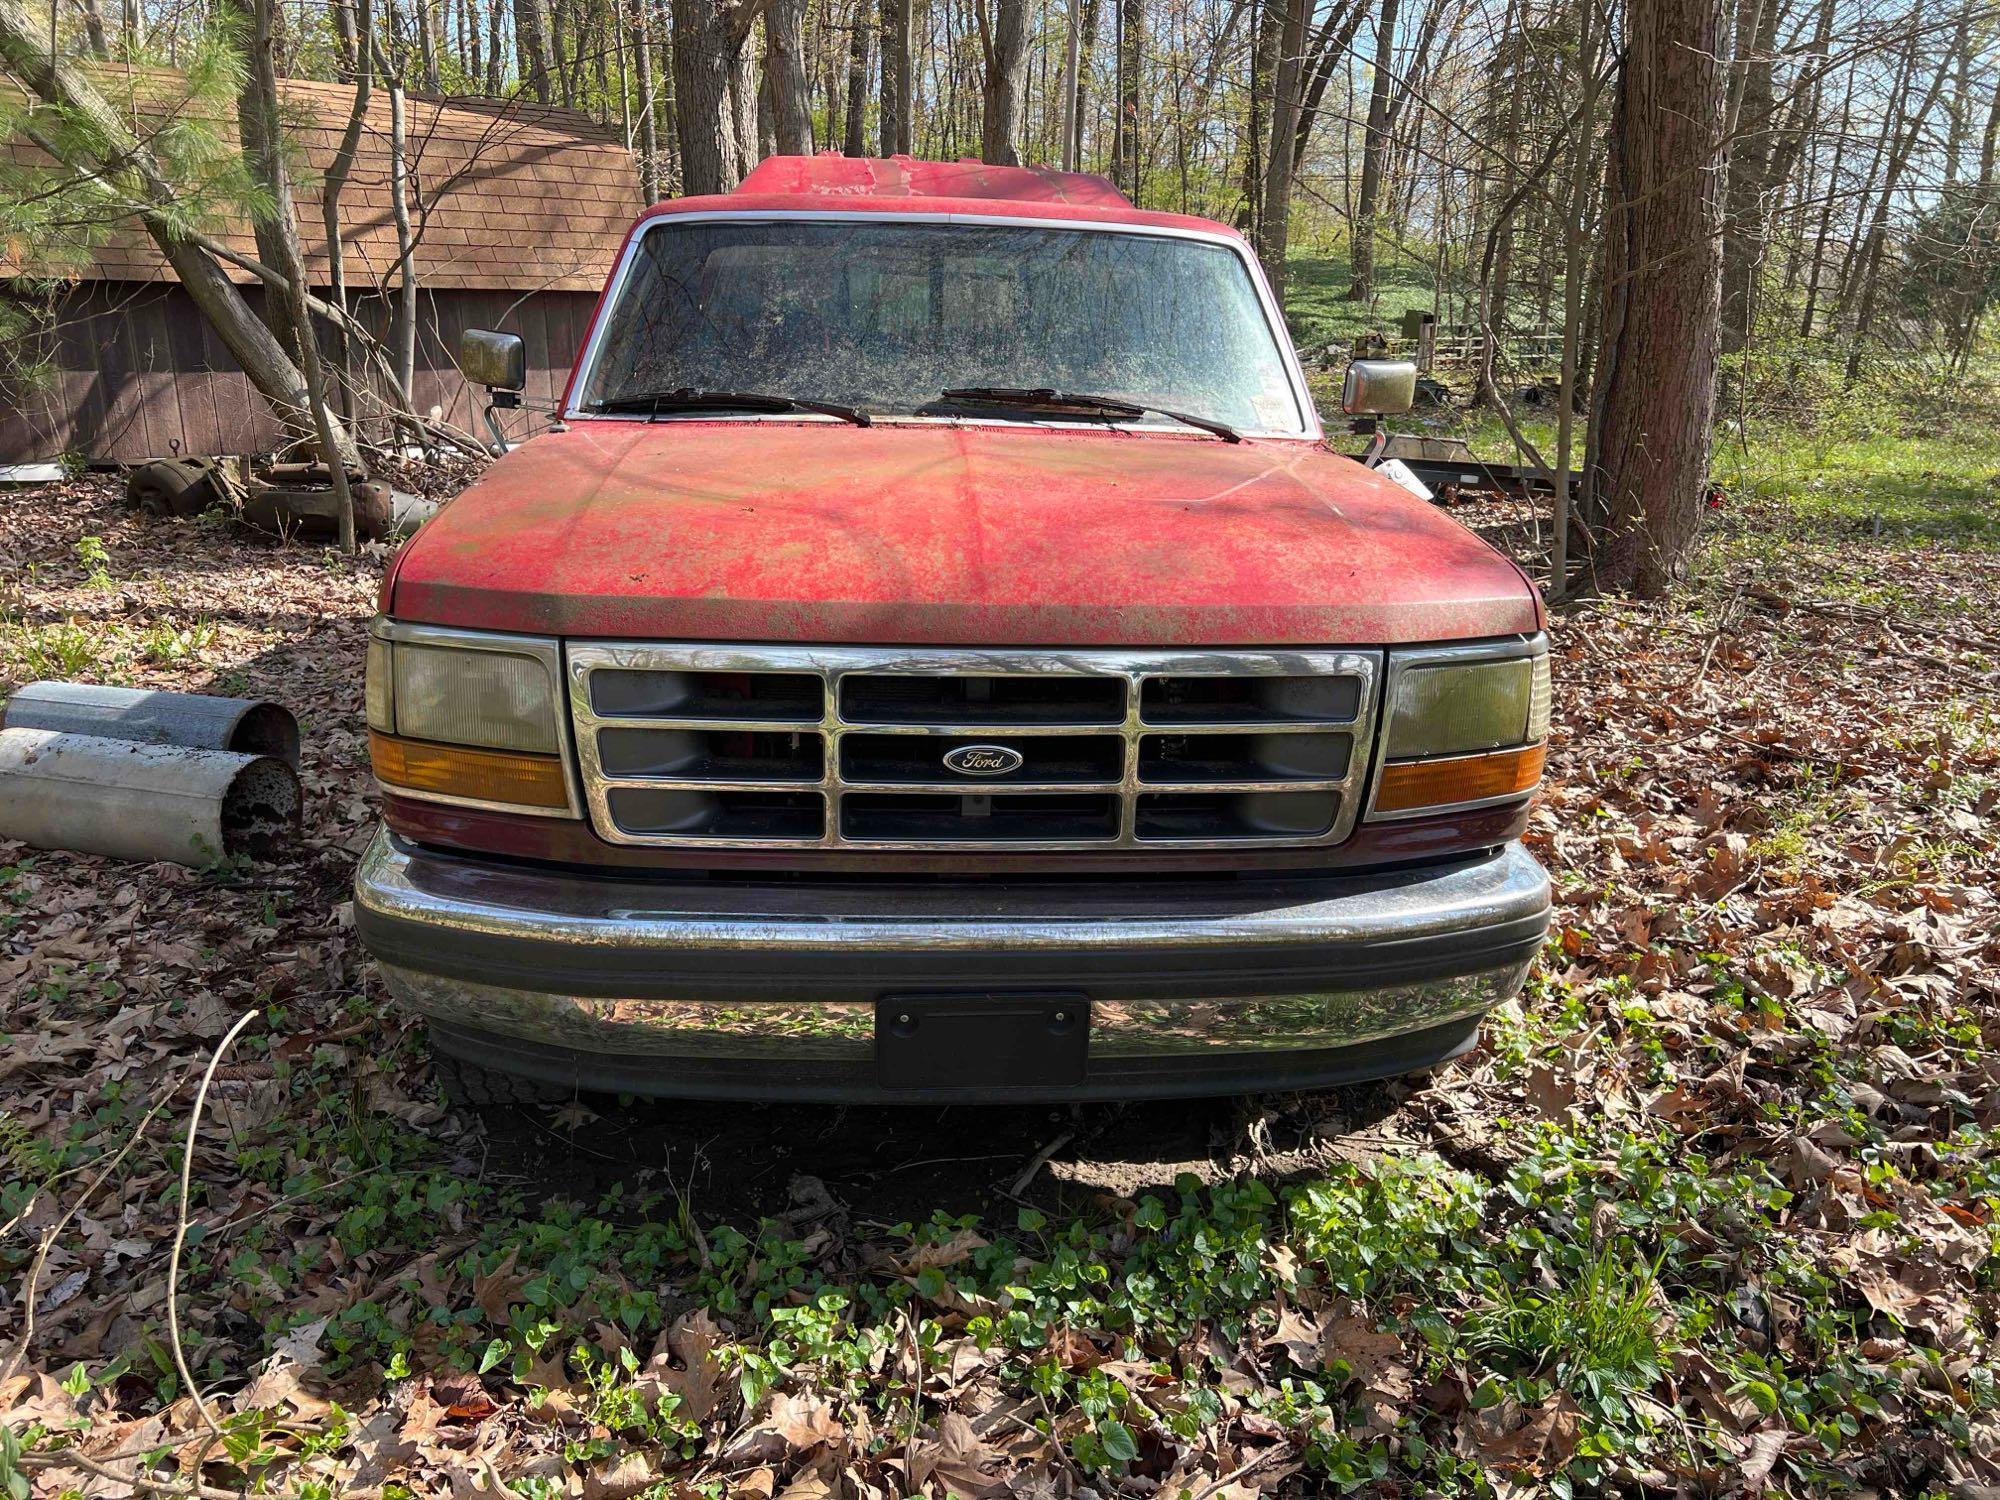 1993 Ford F150 Pick Up Truck 4x2 with cap, not running